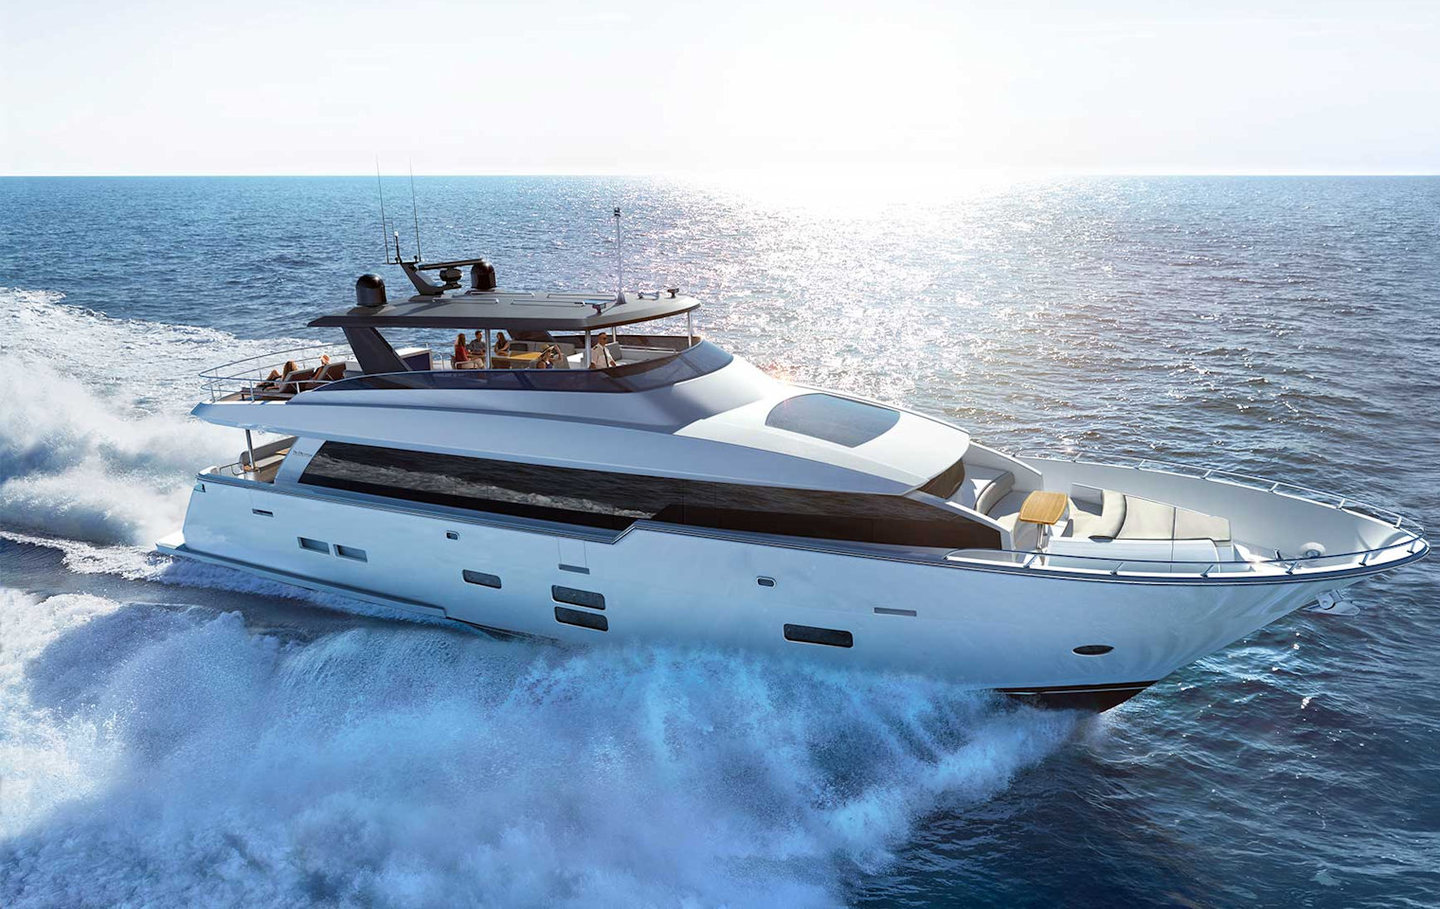 360 VR Virtual Tours of the Hatteras 90 Motor Yacht